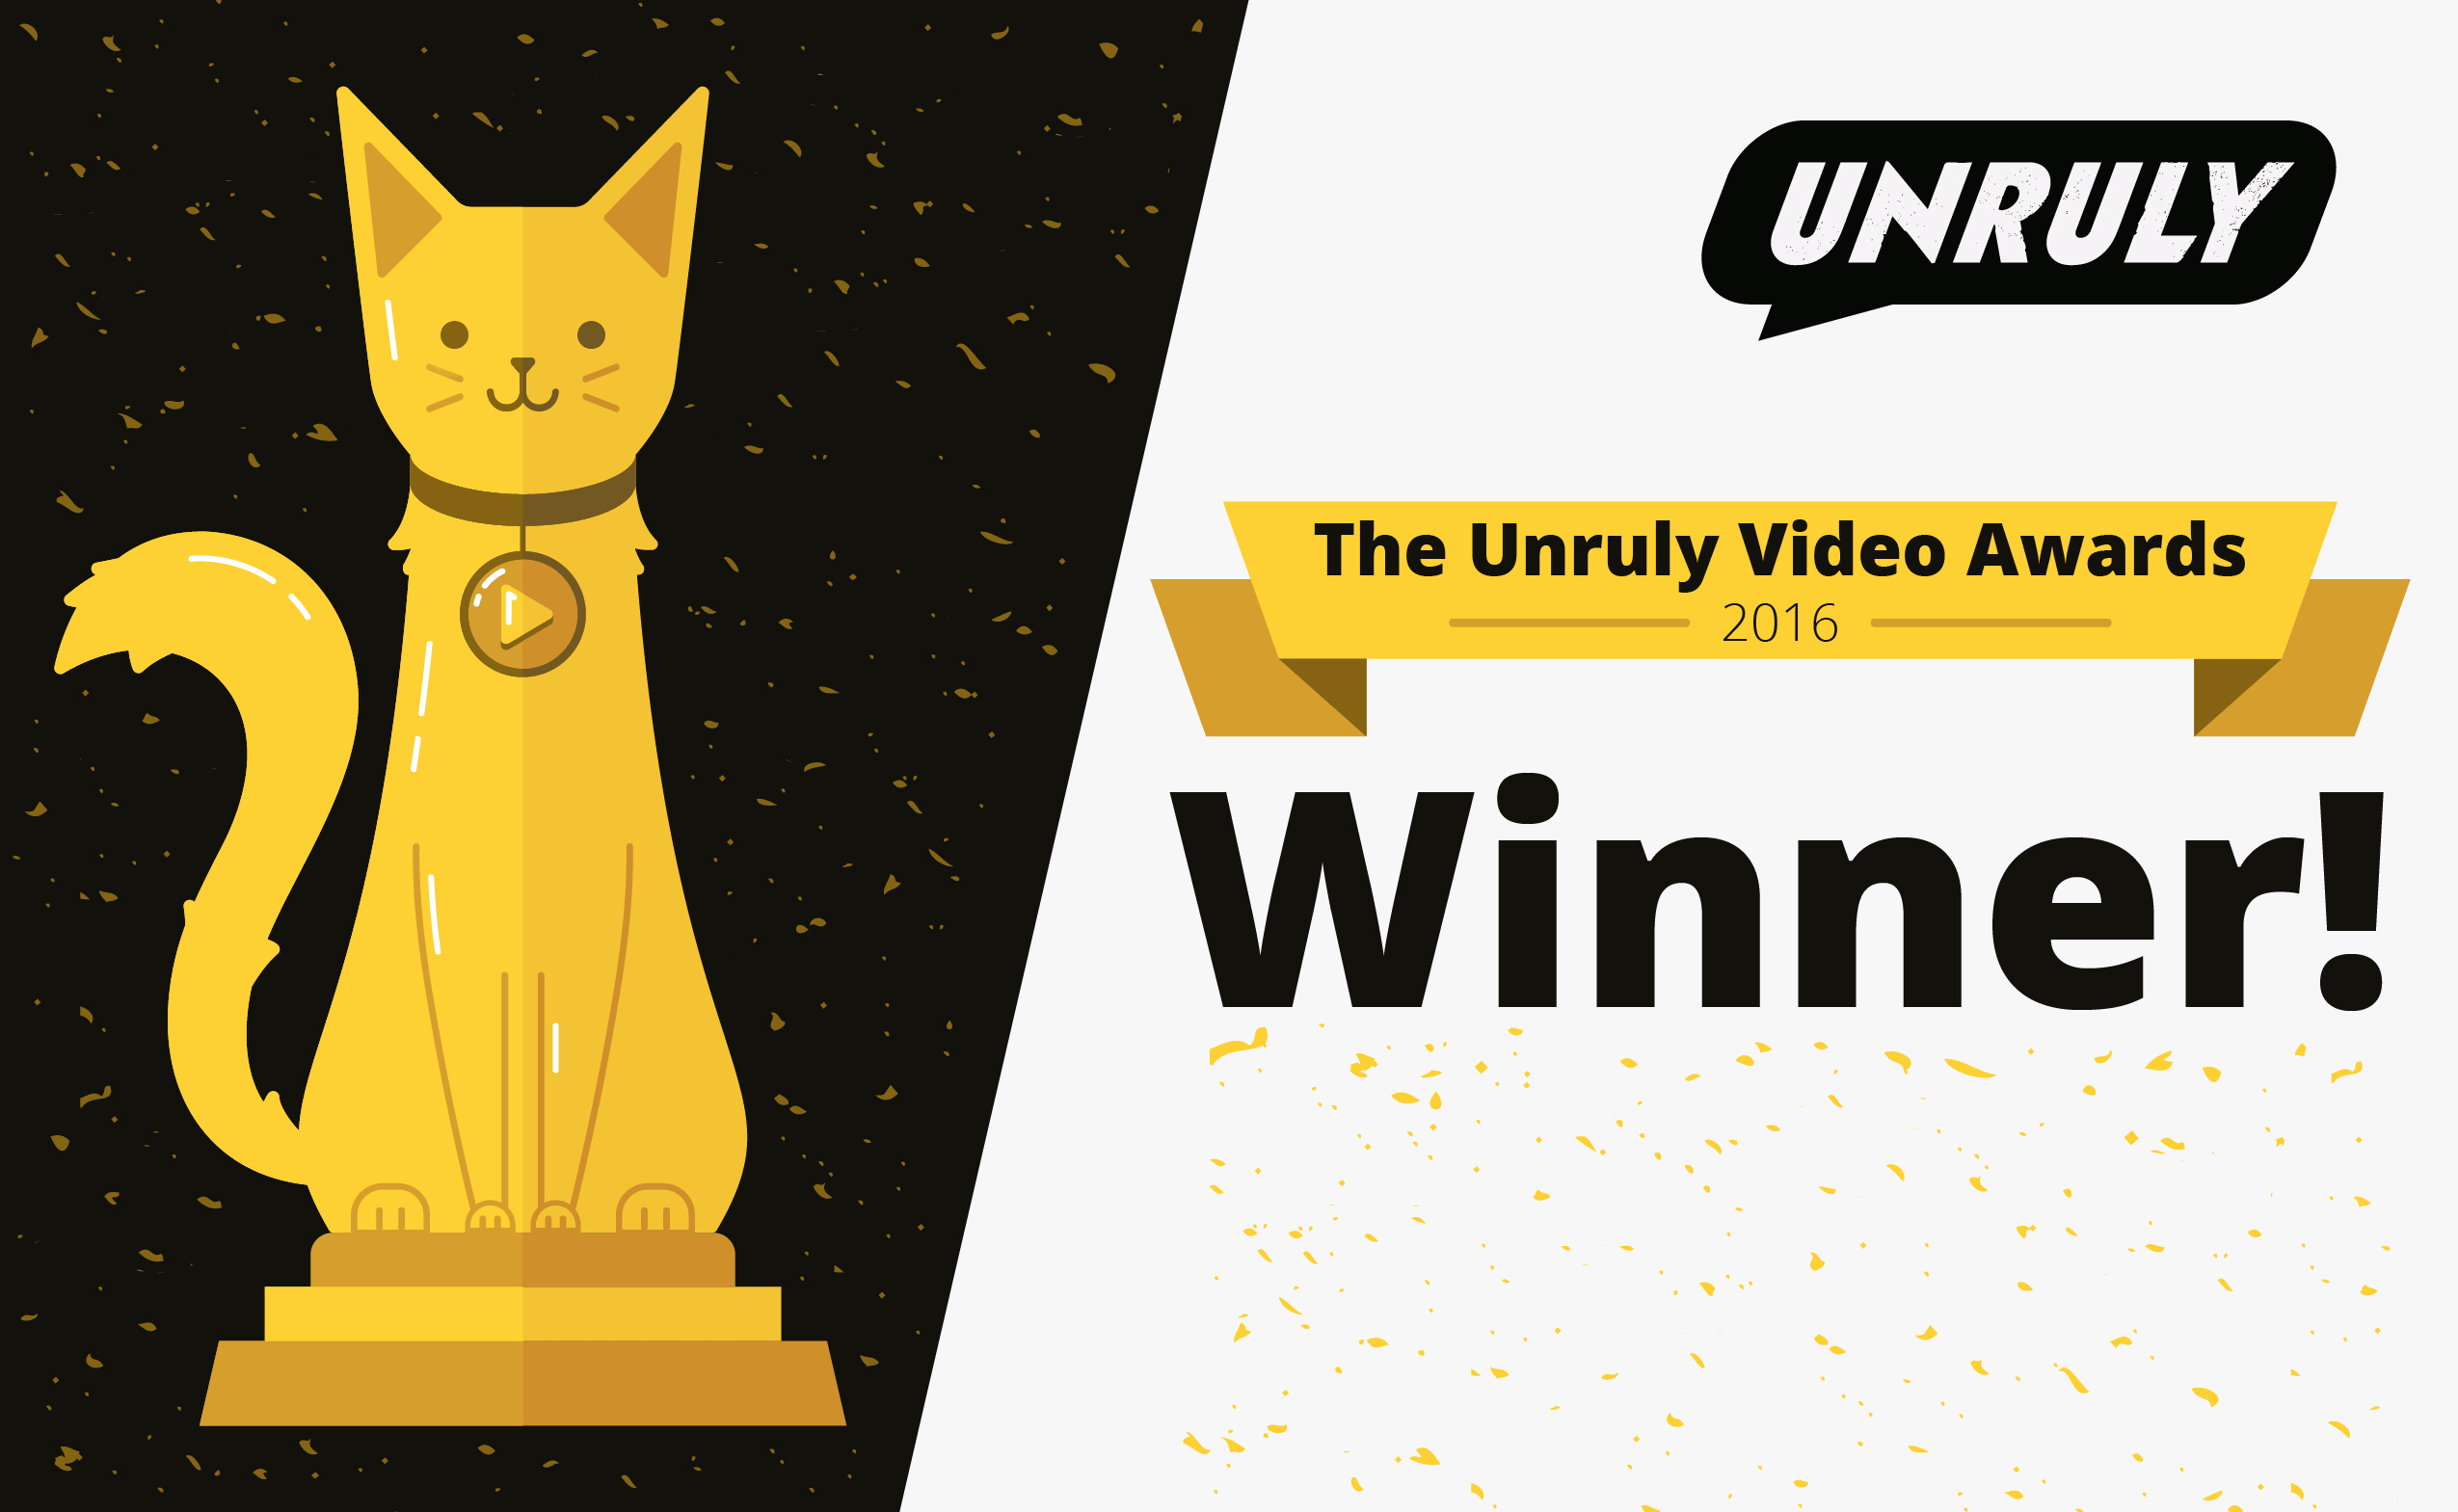 Unruly’s 4th Annual Video Awards Celebrate The Brands That Moved The World In 2016